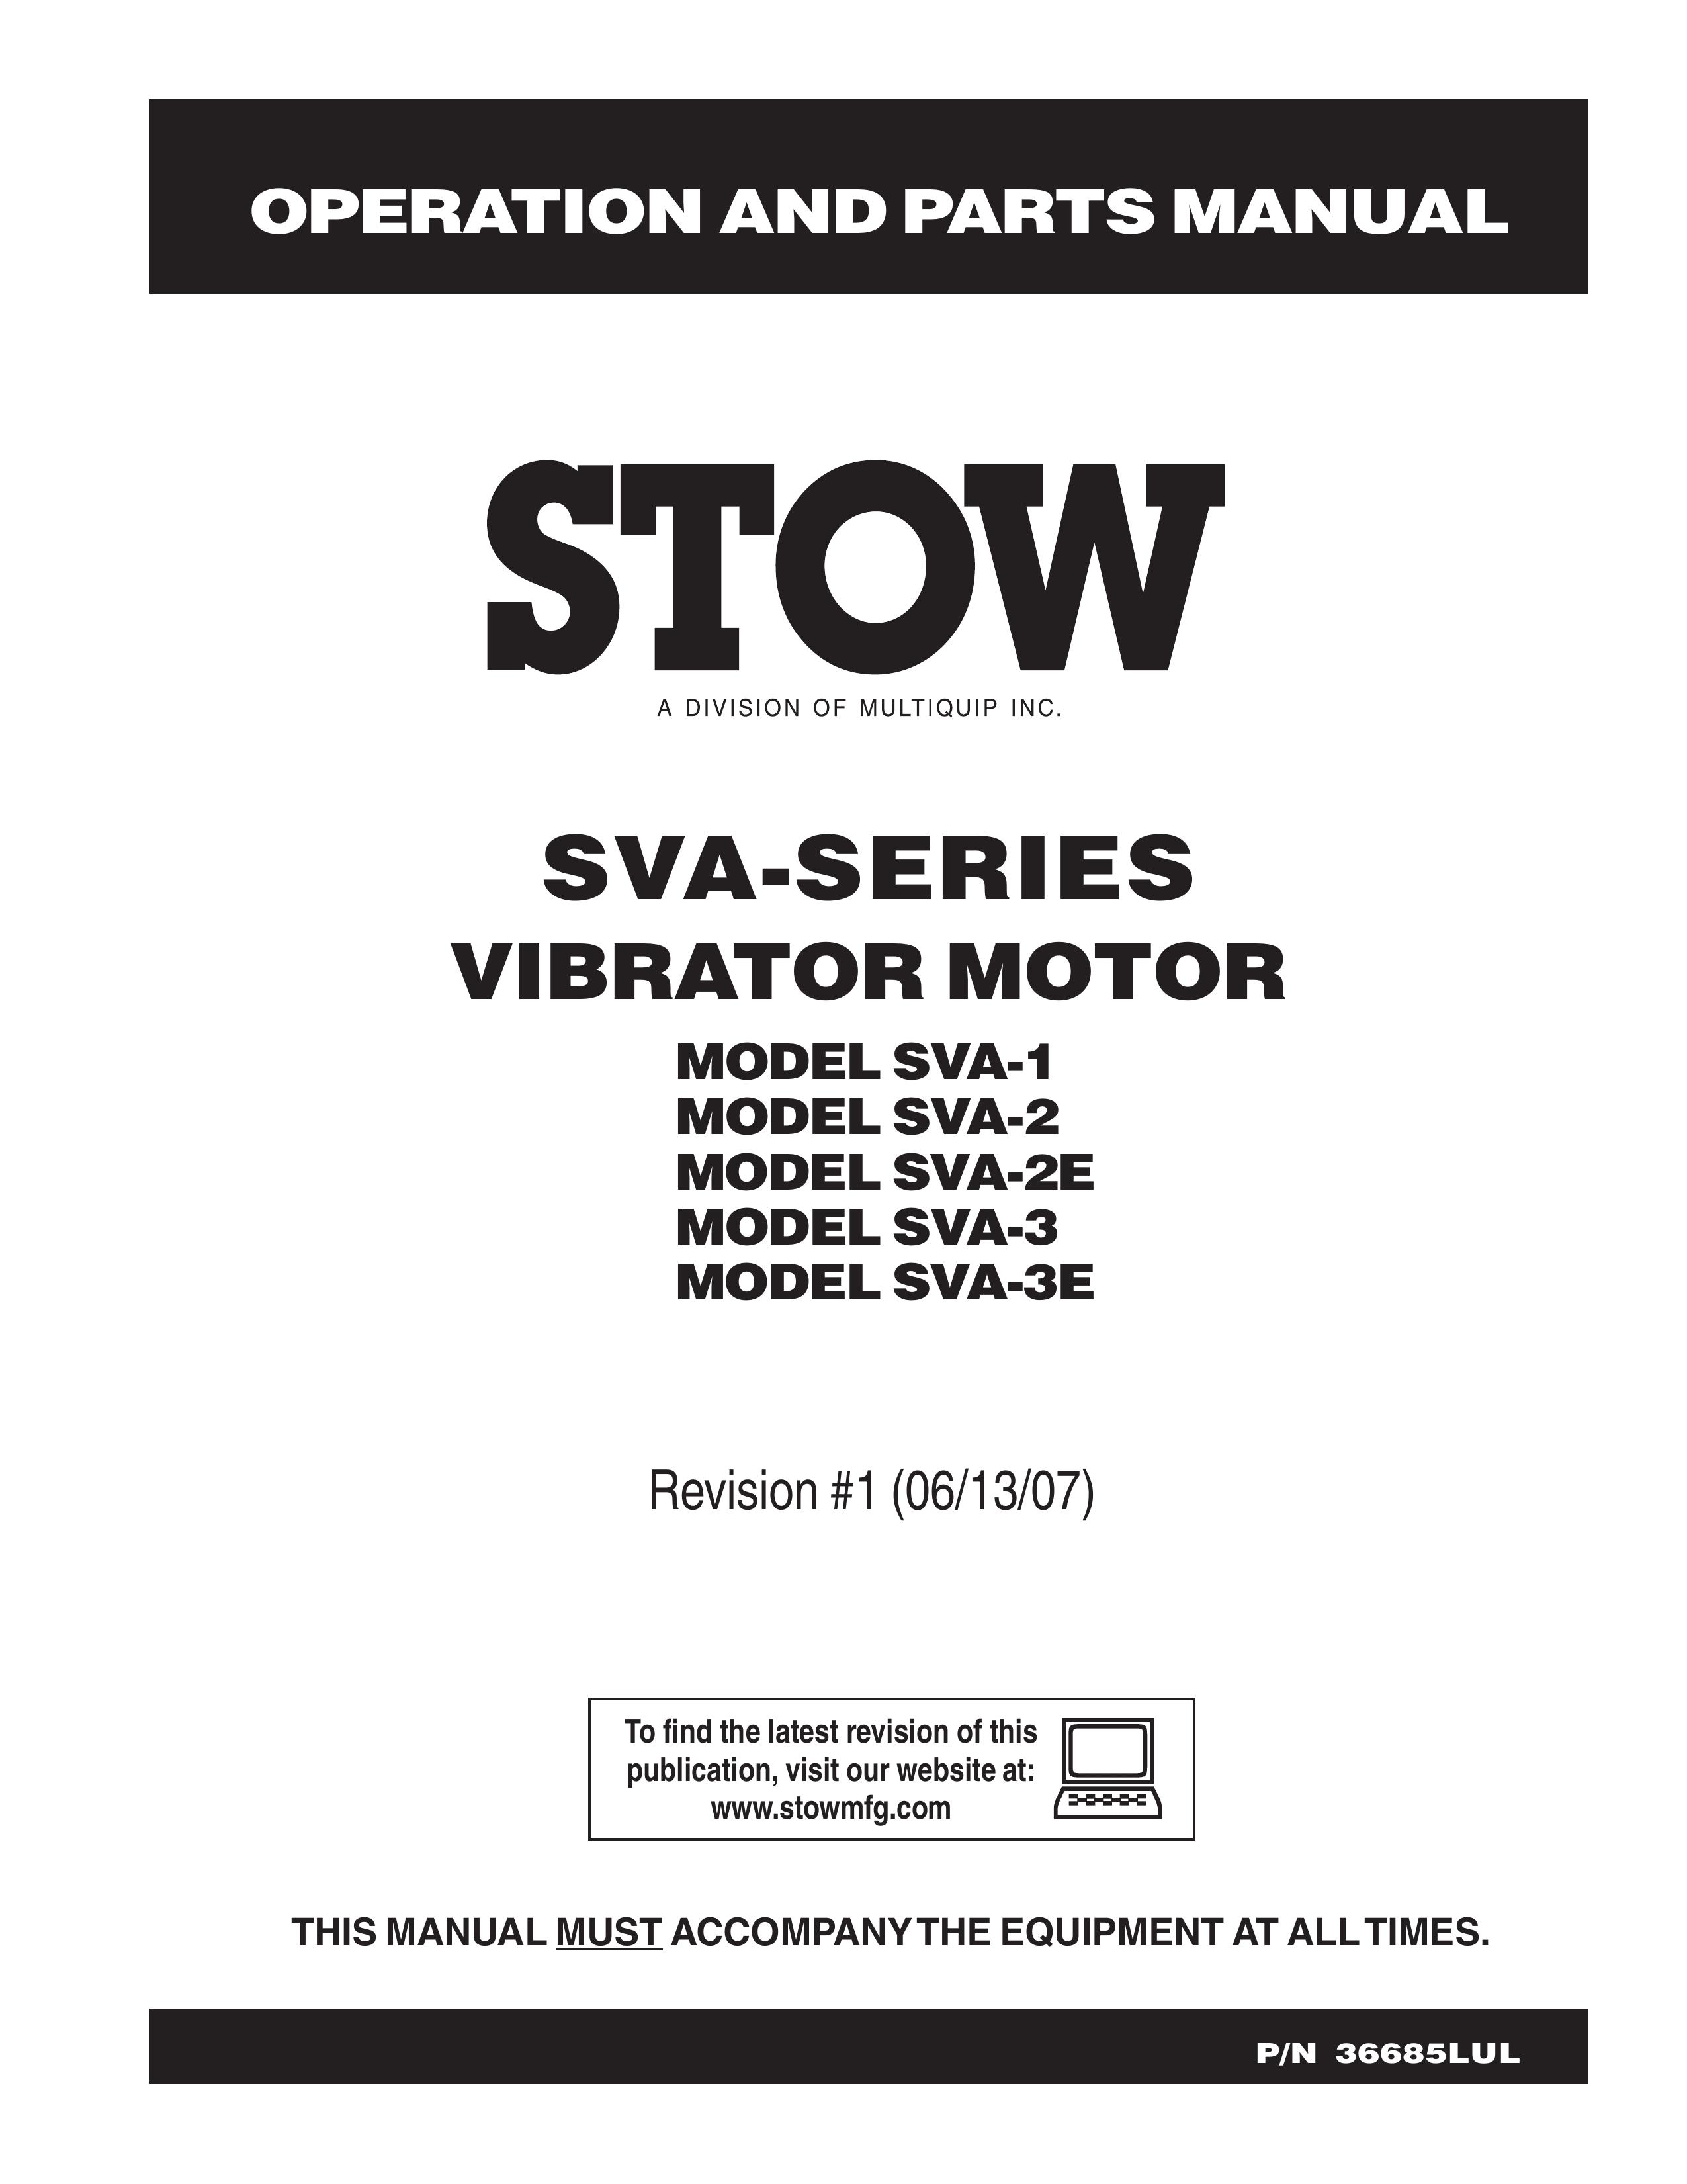 Stow SVA-2 Outboard Motor User Manual